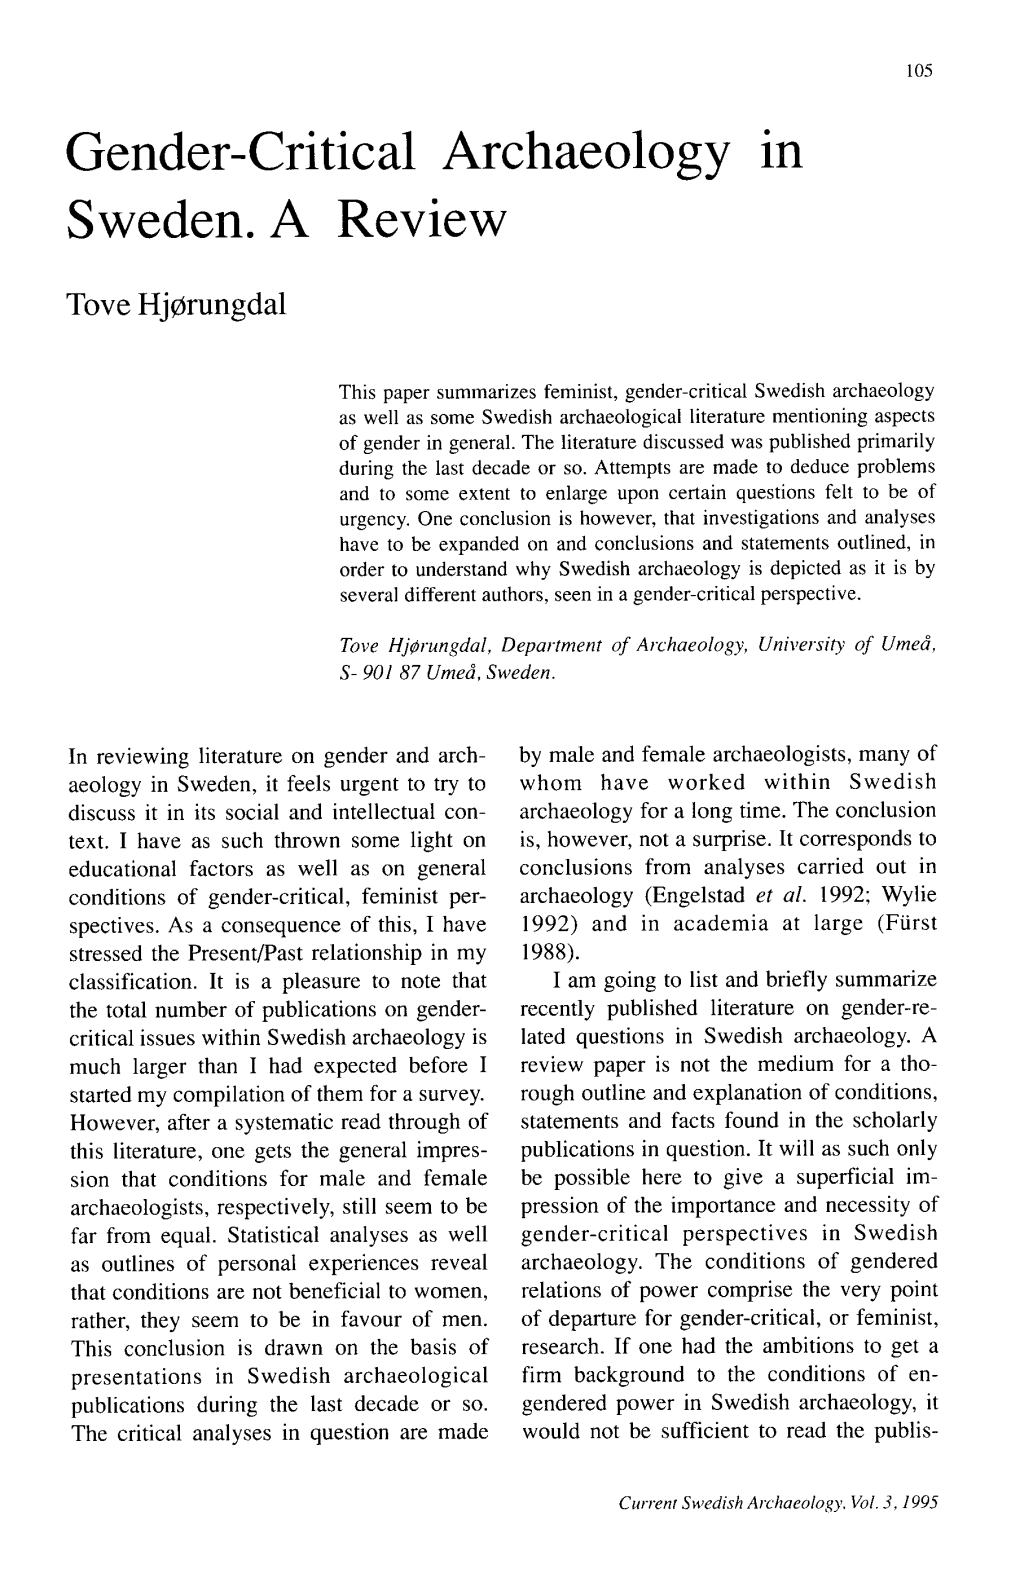 Gender-Critical Archaeology in Sweden. a Review